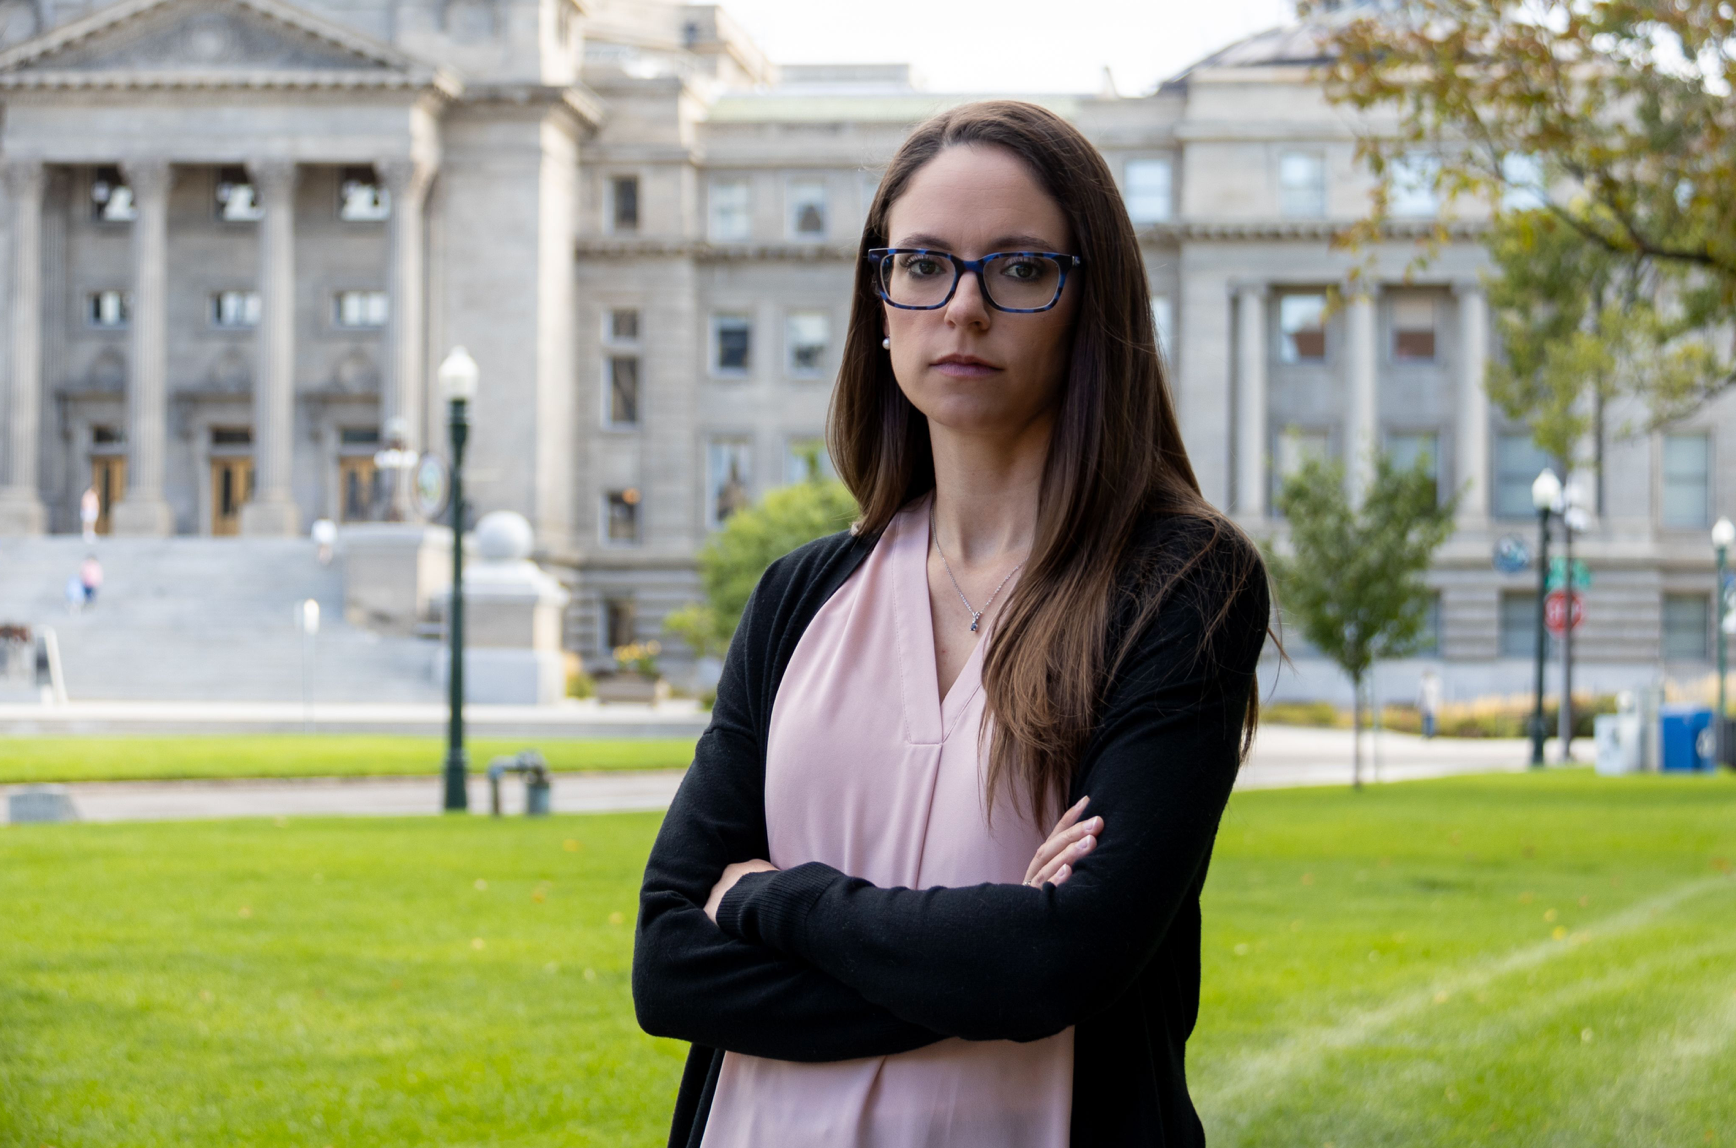 Jennifer Adkins is a plaintiff in a lawsuit targeting Idaho’s anti-abortion law for clarity in exceptions for medical emergencies. She was denied emergency abortion care after an ultrasound revealed several dangerous complications.